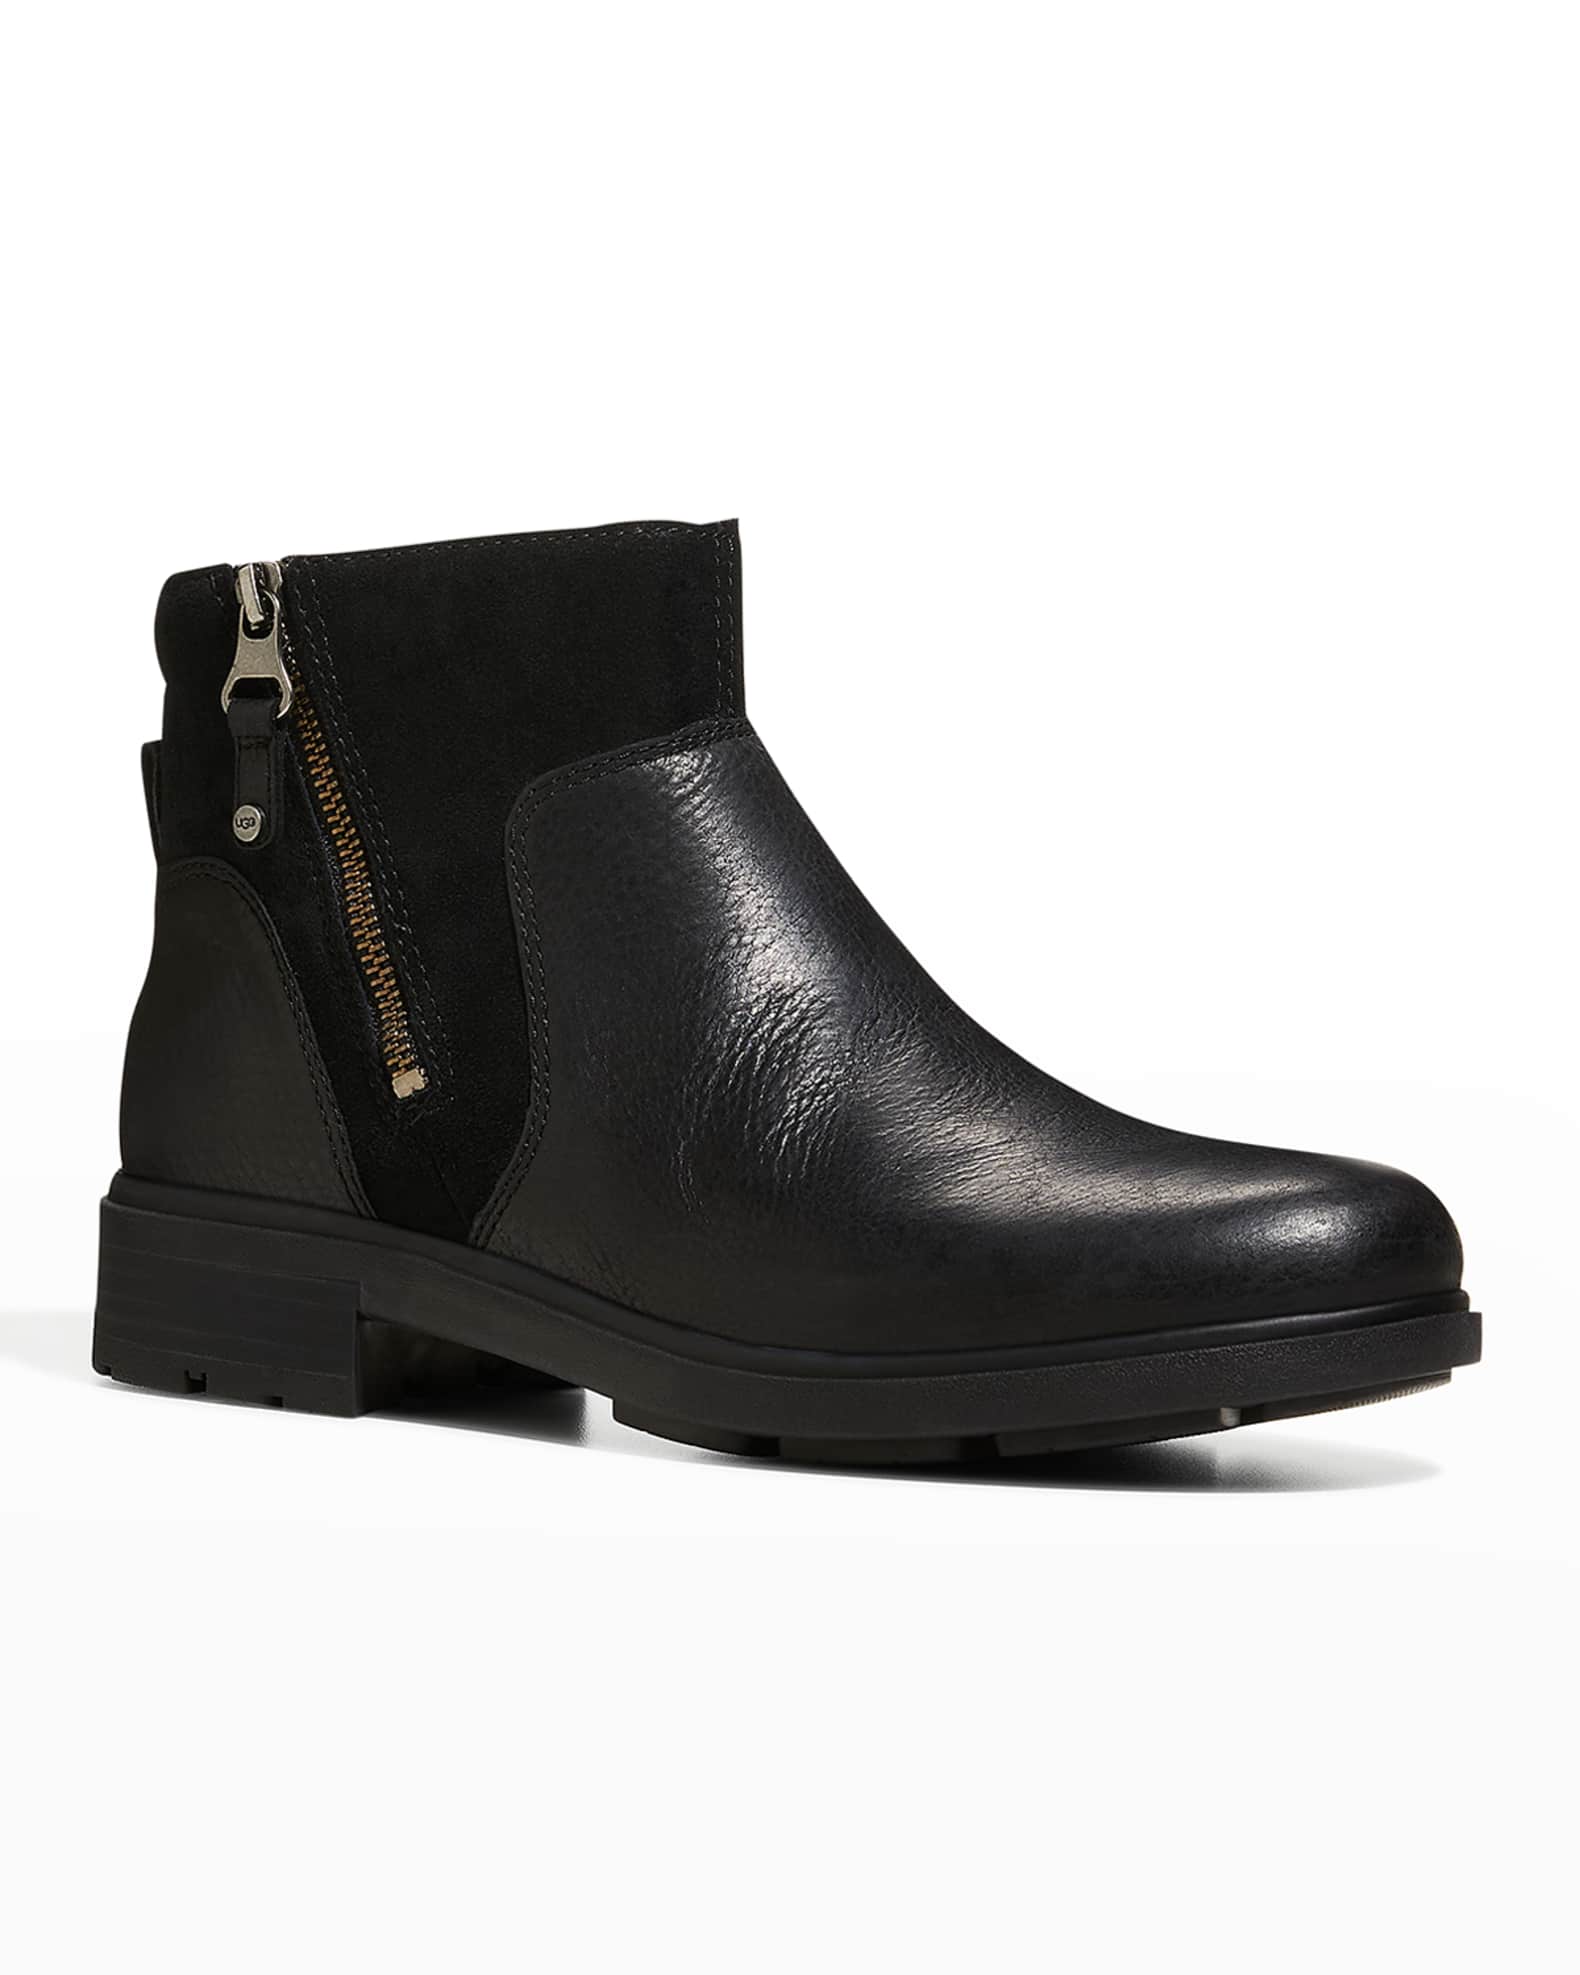 Compound Asian envy UGG Harrison Waterproof Mix-Leather Zip Ankle Booties | Neiman Marcus